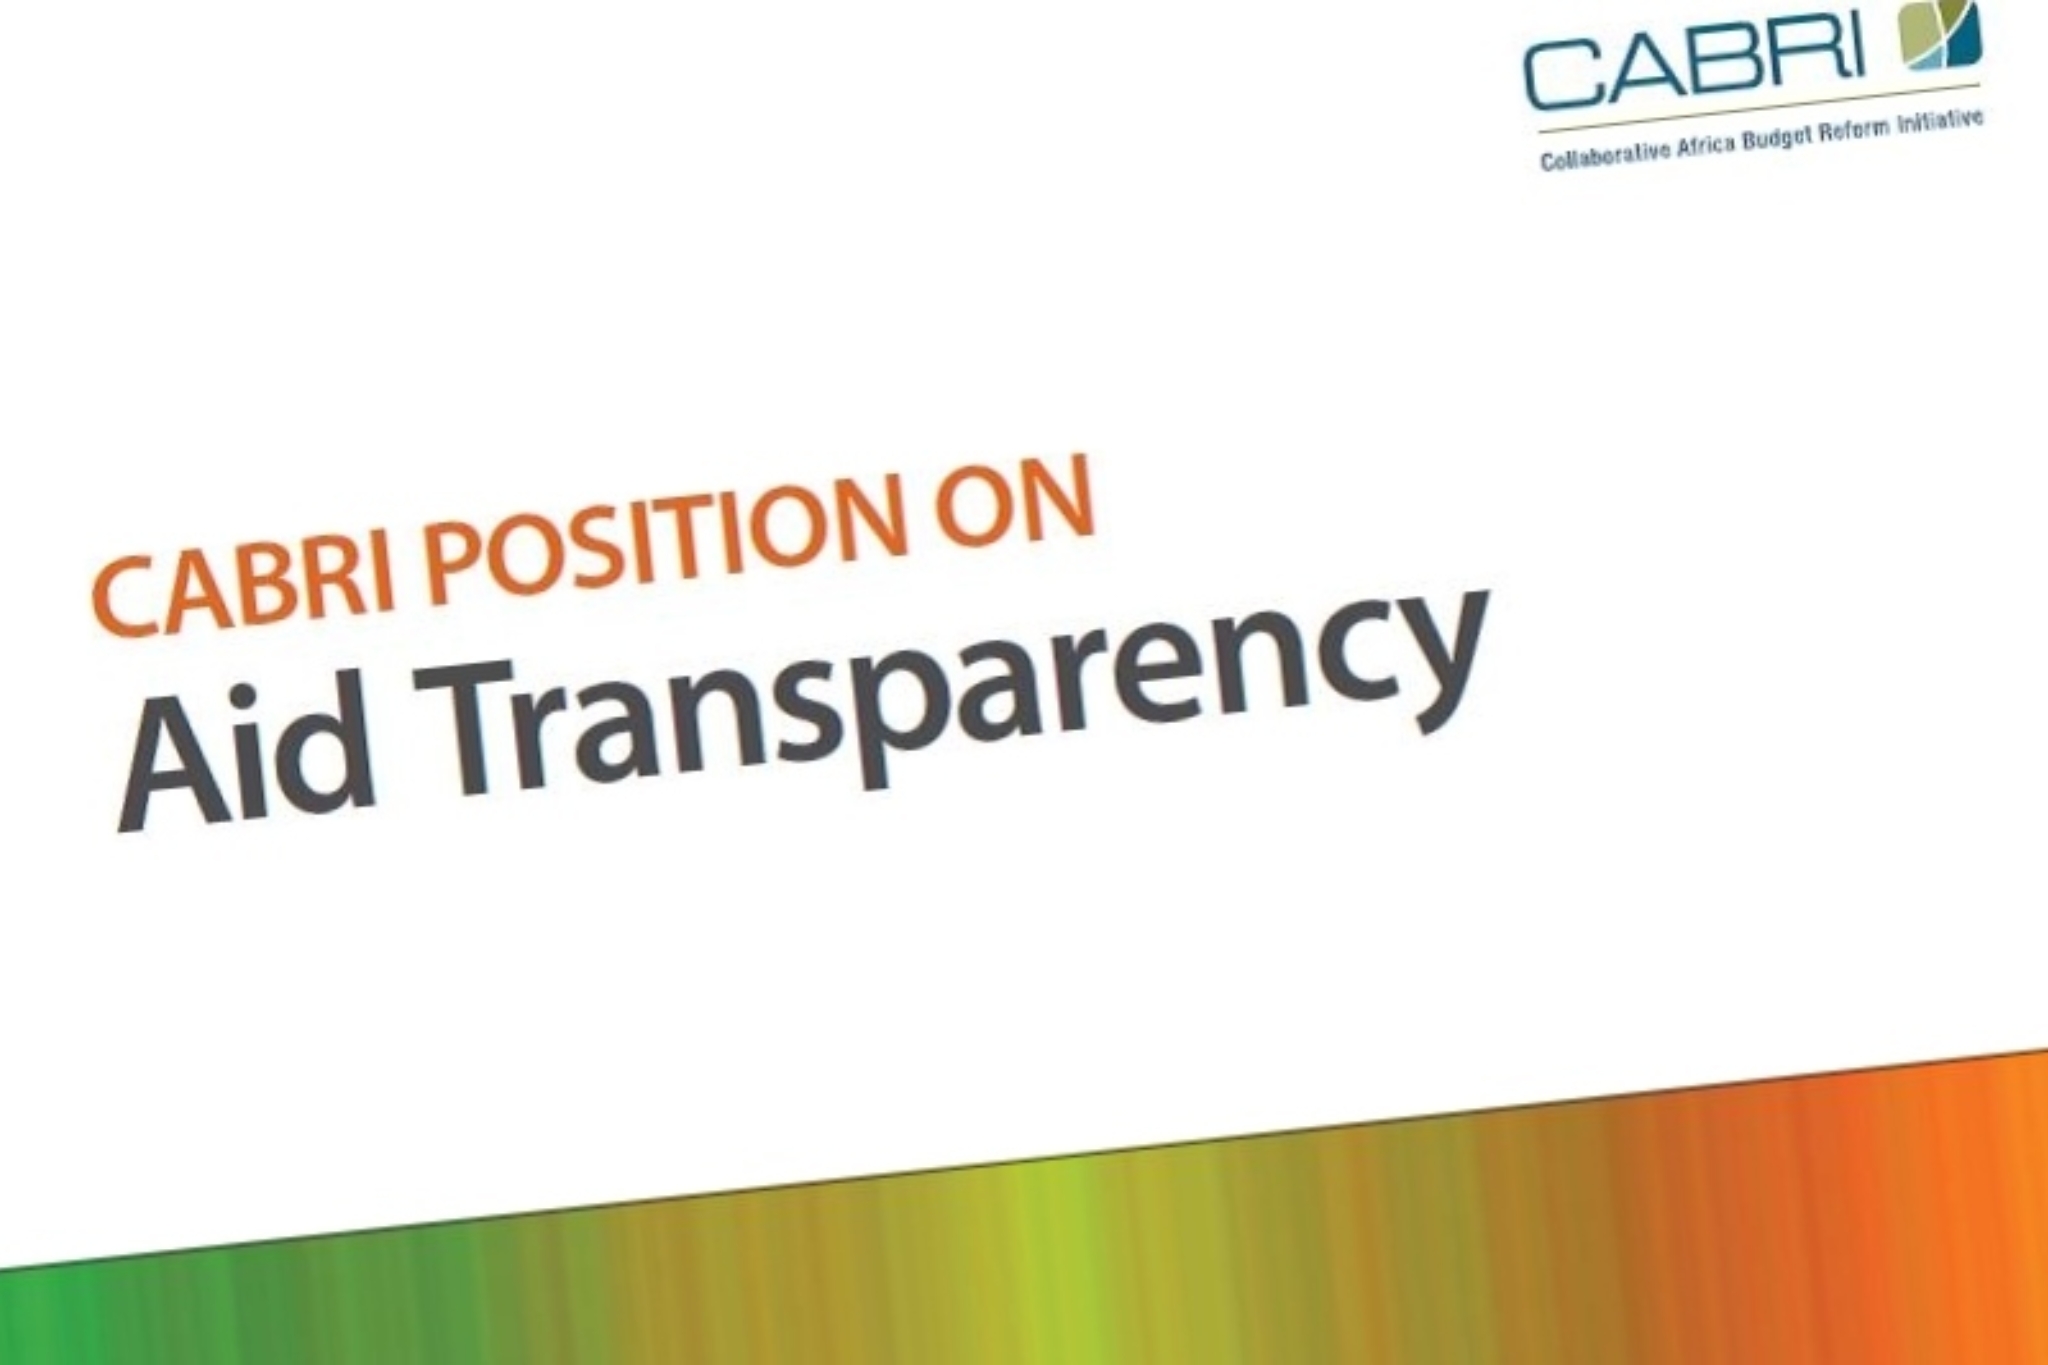 Aid Transparency Position